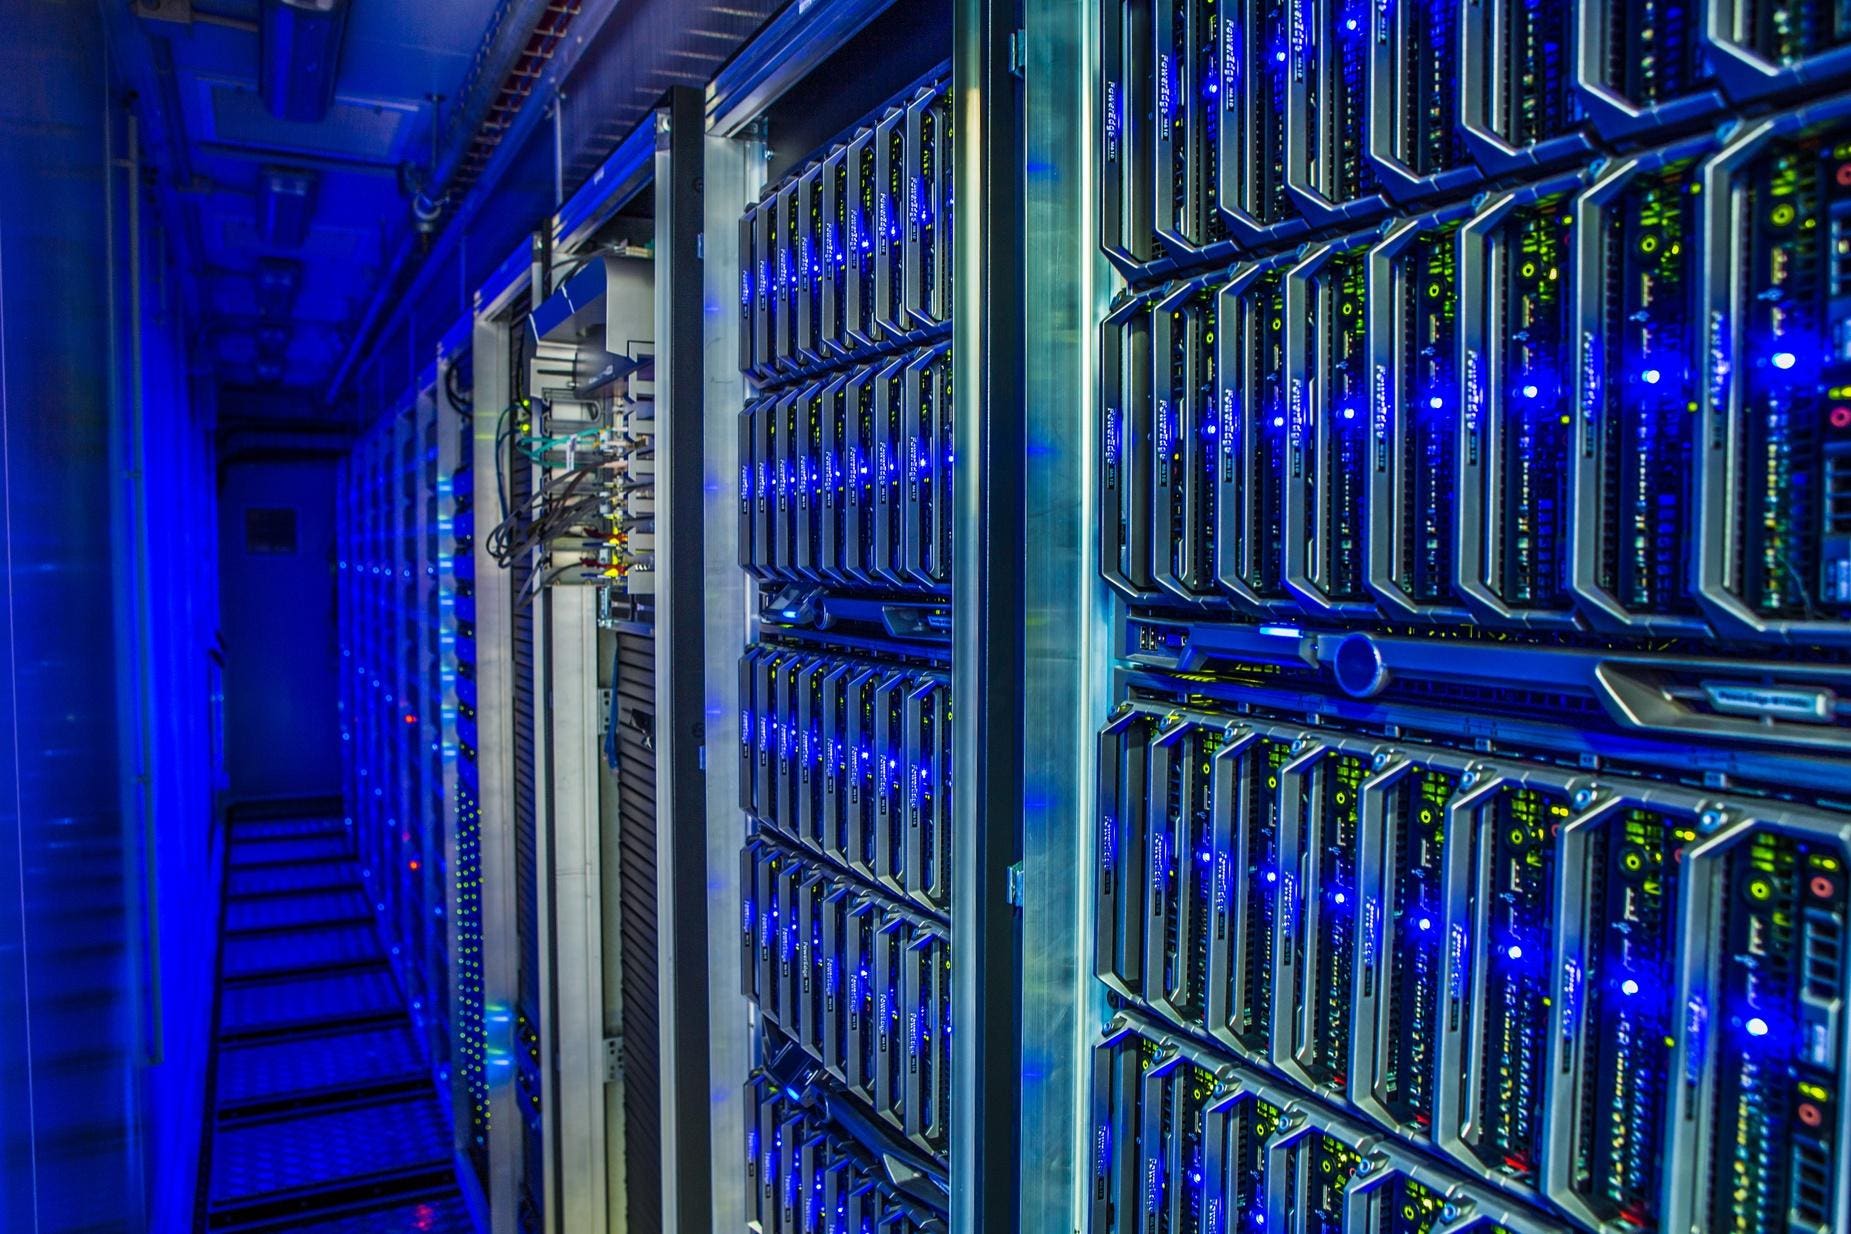 A row of servers in a data center, representing the secure and reliable data storage and protection offered by Fast Fixx's data security solutions